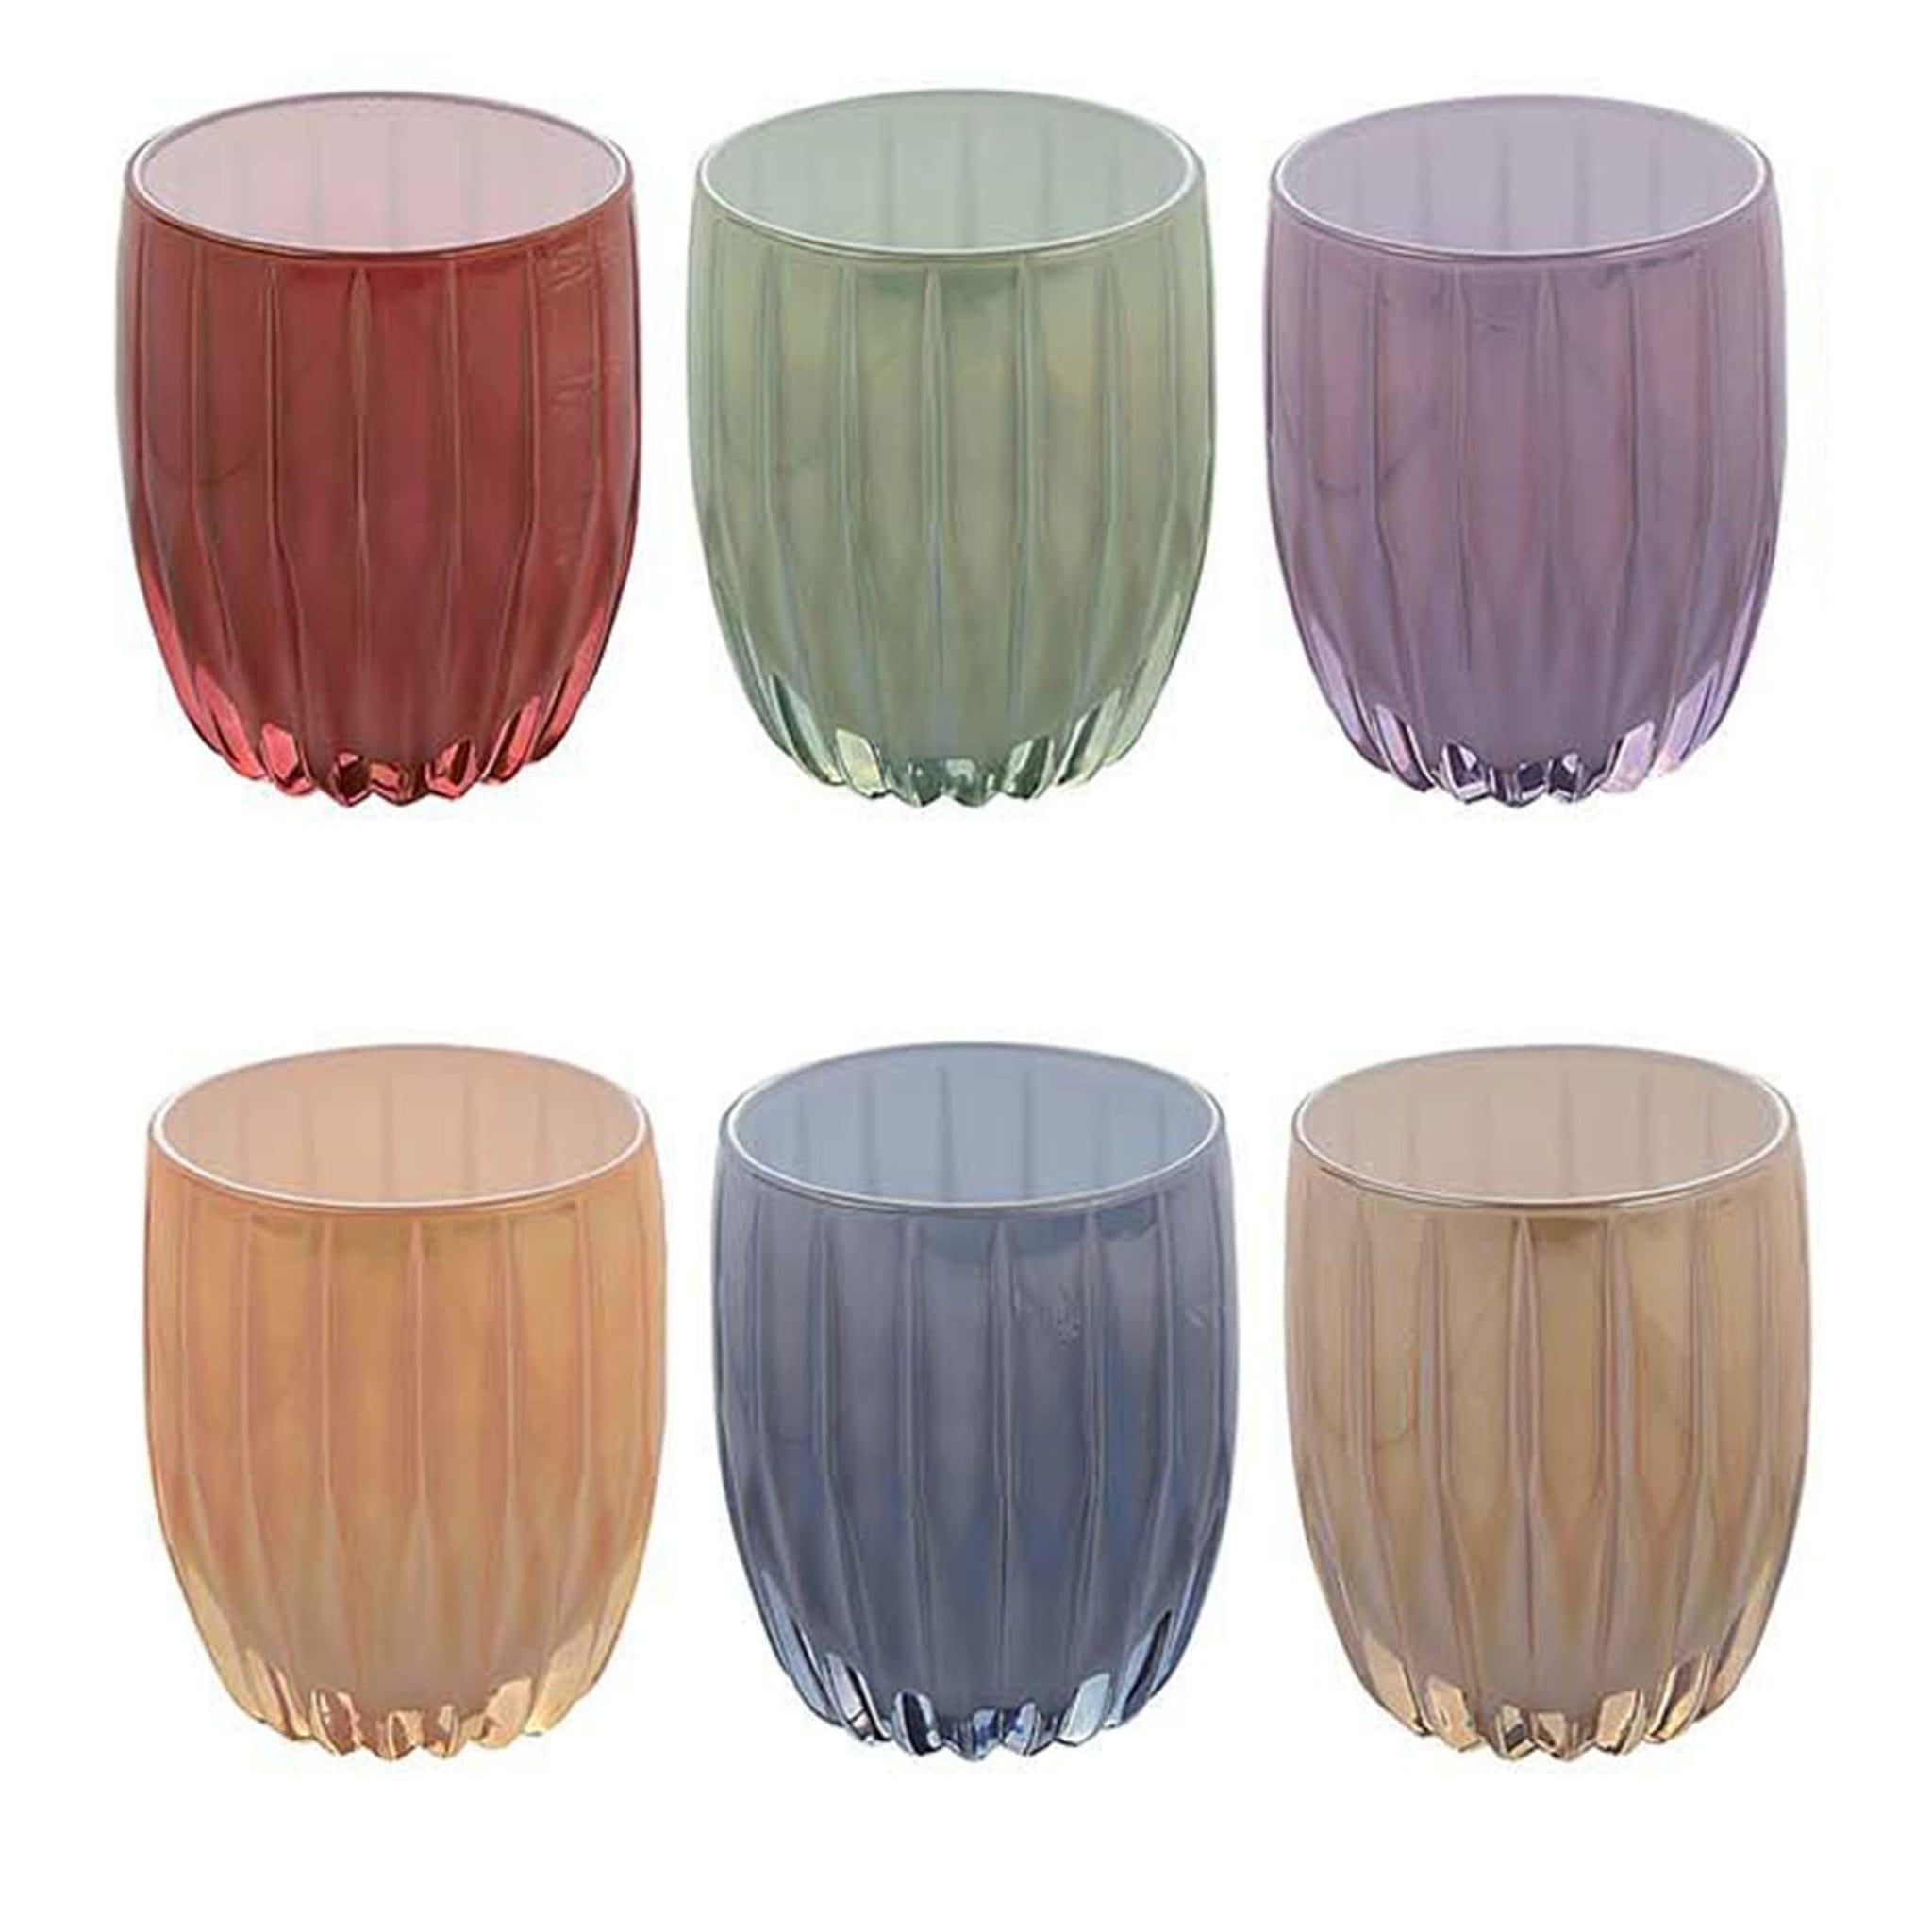 This set of six water glasses is a magnificent rainbow of colors that will enliven any dining set with its sophisticated and eclectic allure. Boasting a unique and different hue, each piece is handcrafted of crystal and is decorated by hand with an